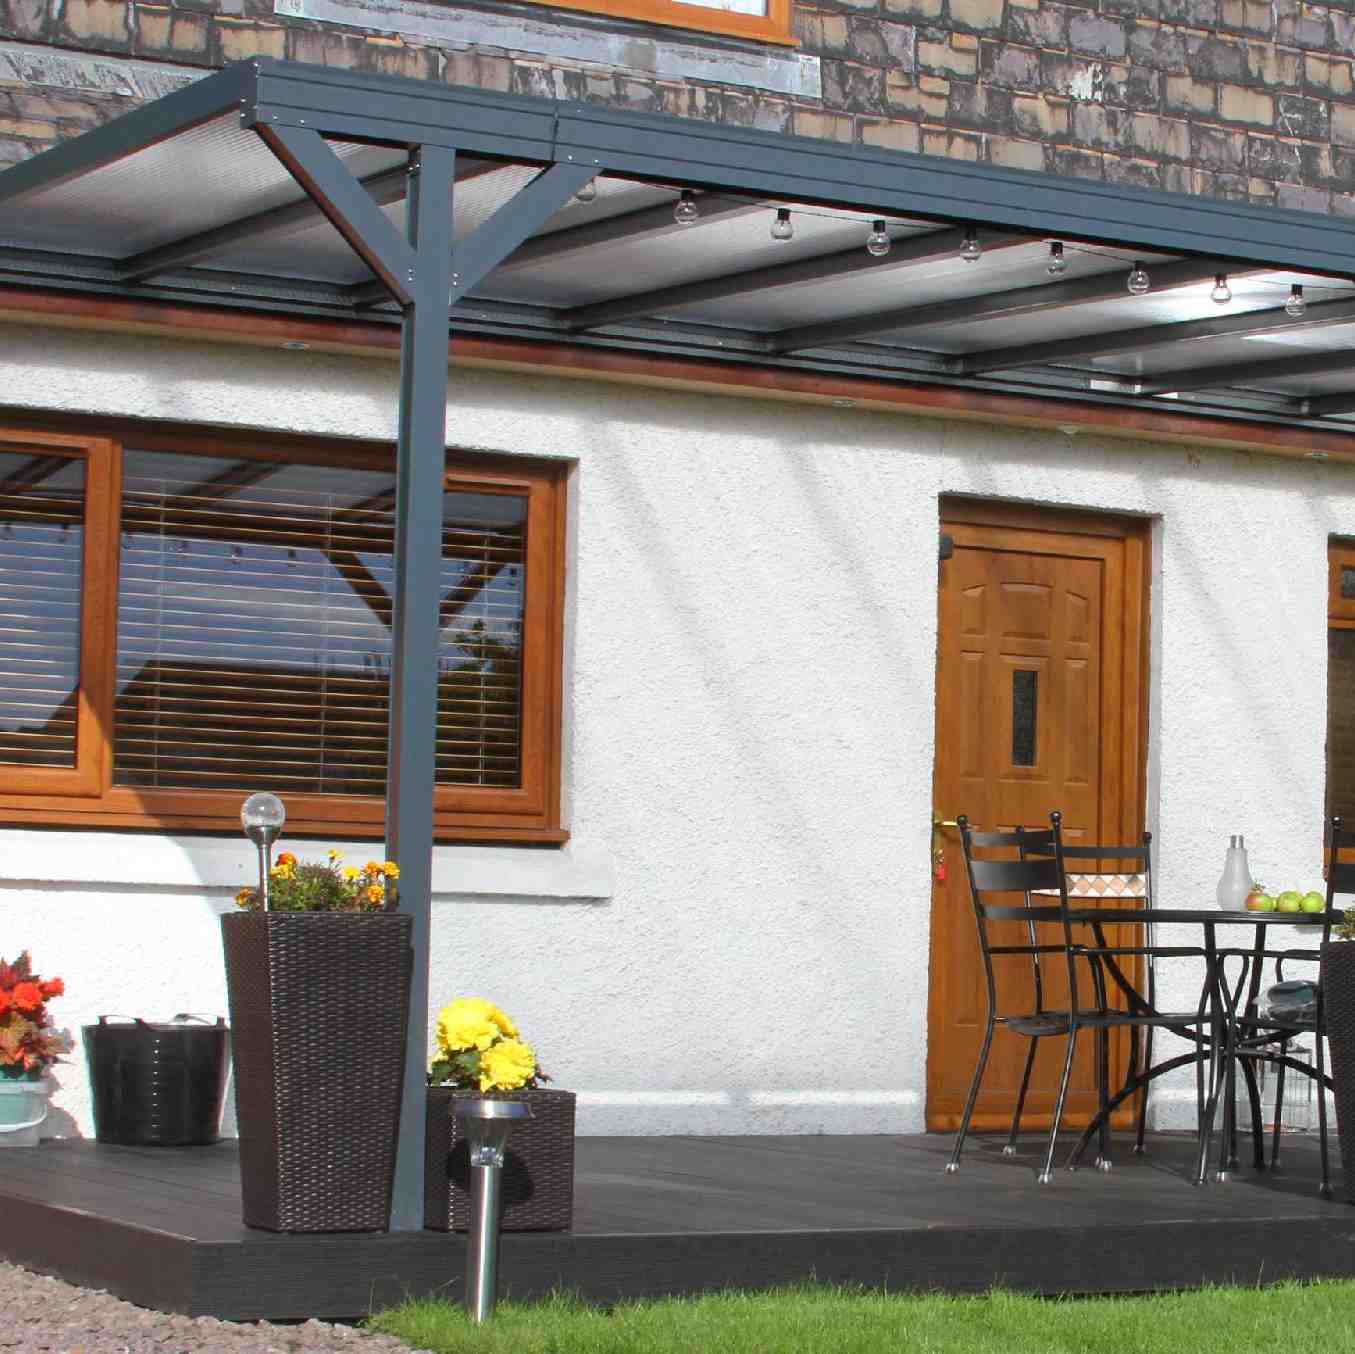 Omega Verandah, Anthracite Grey, 6mm Glass Clear Plate Polycarbonate Glazing - 7.4m (W) x 4.0m (P), (4) Supporting Posts